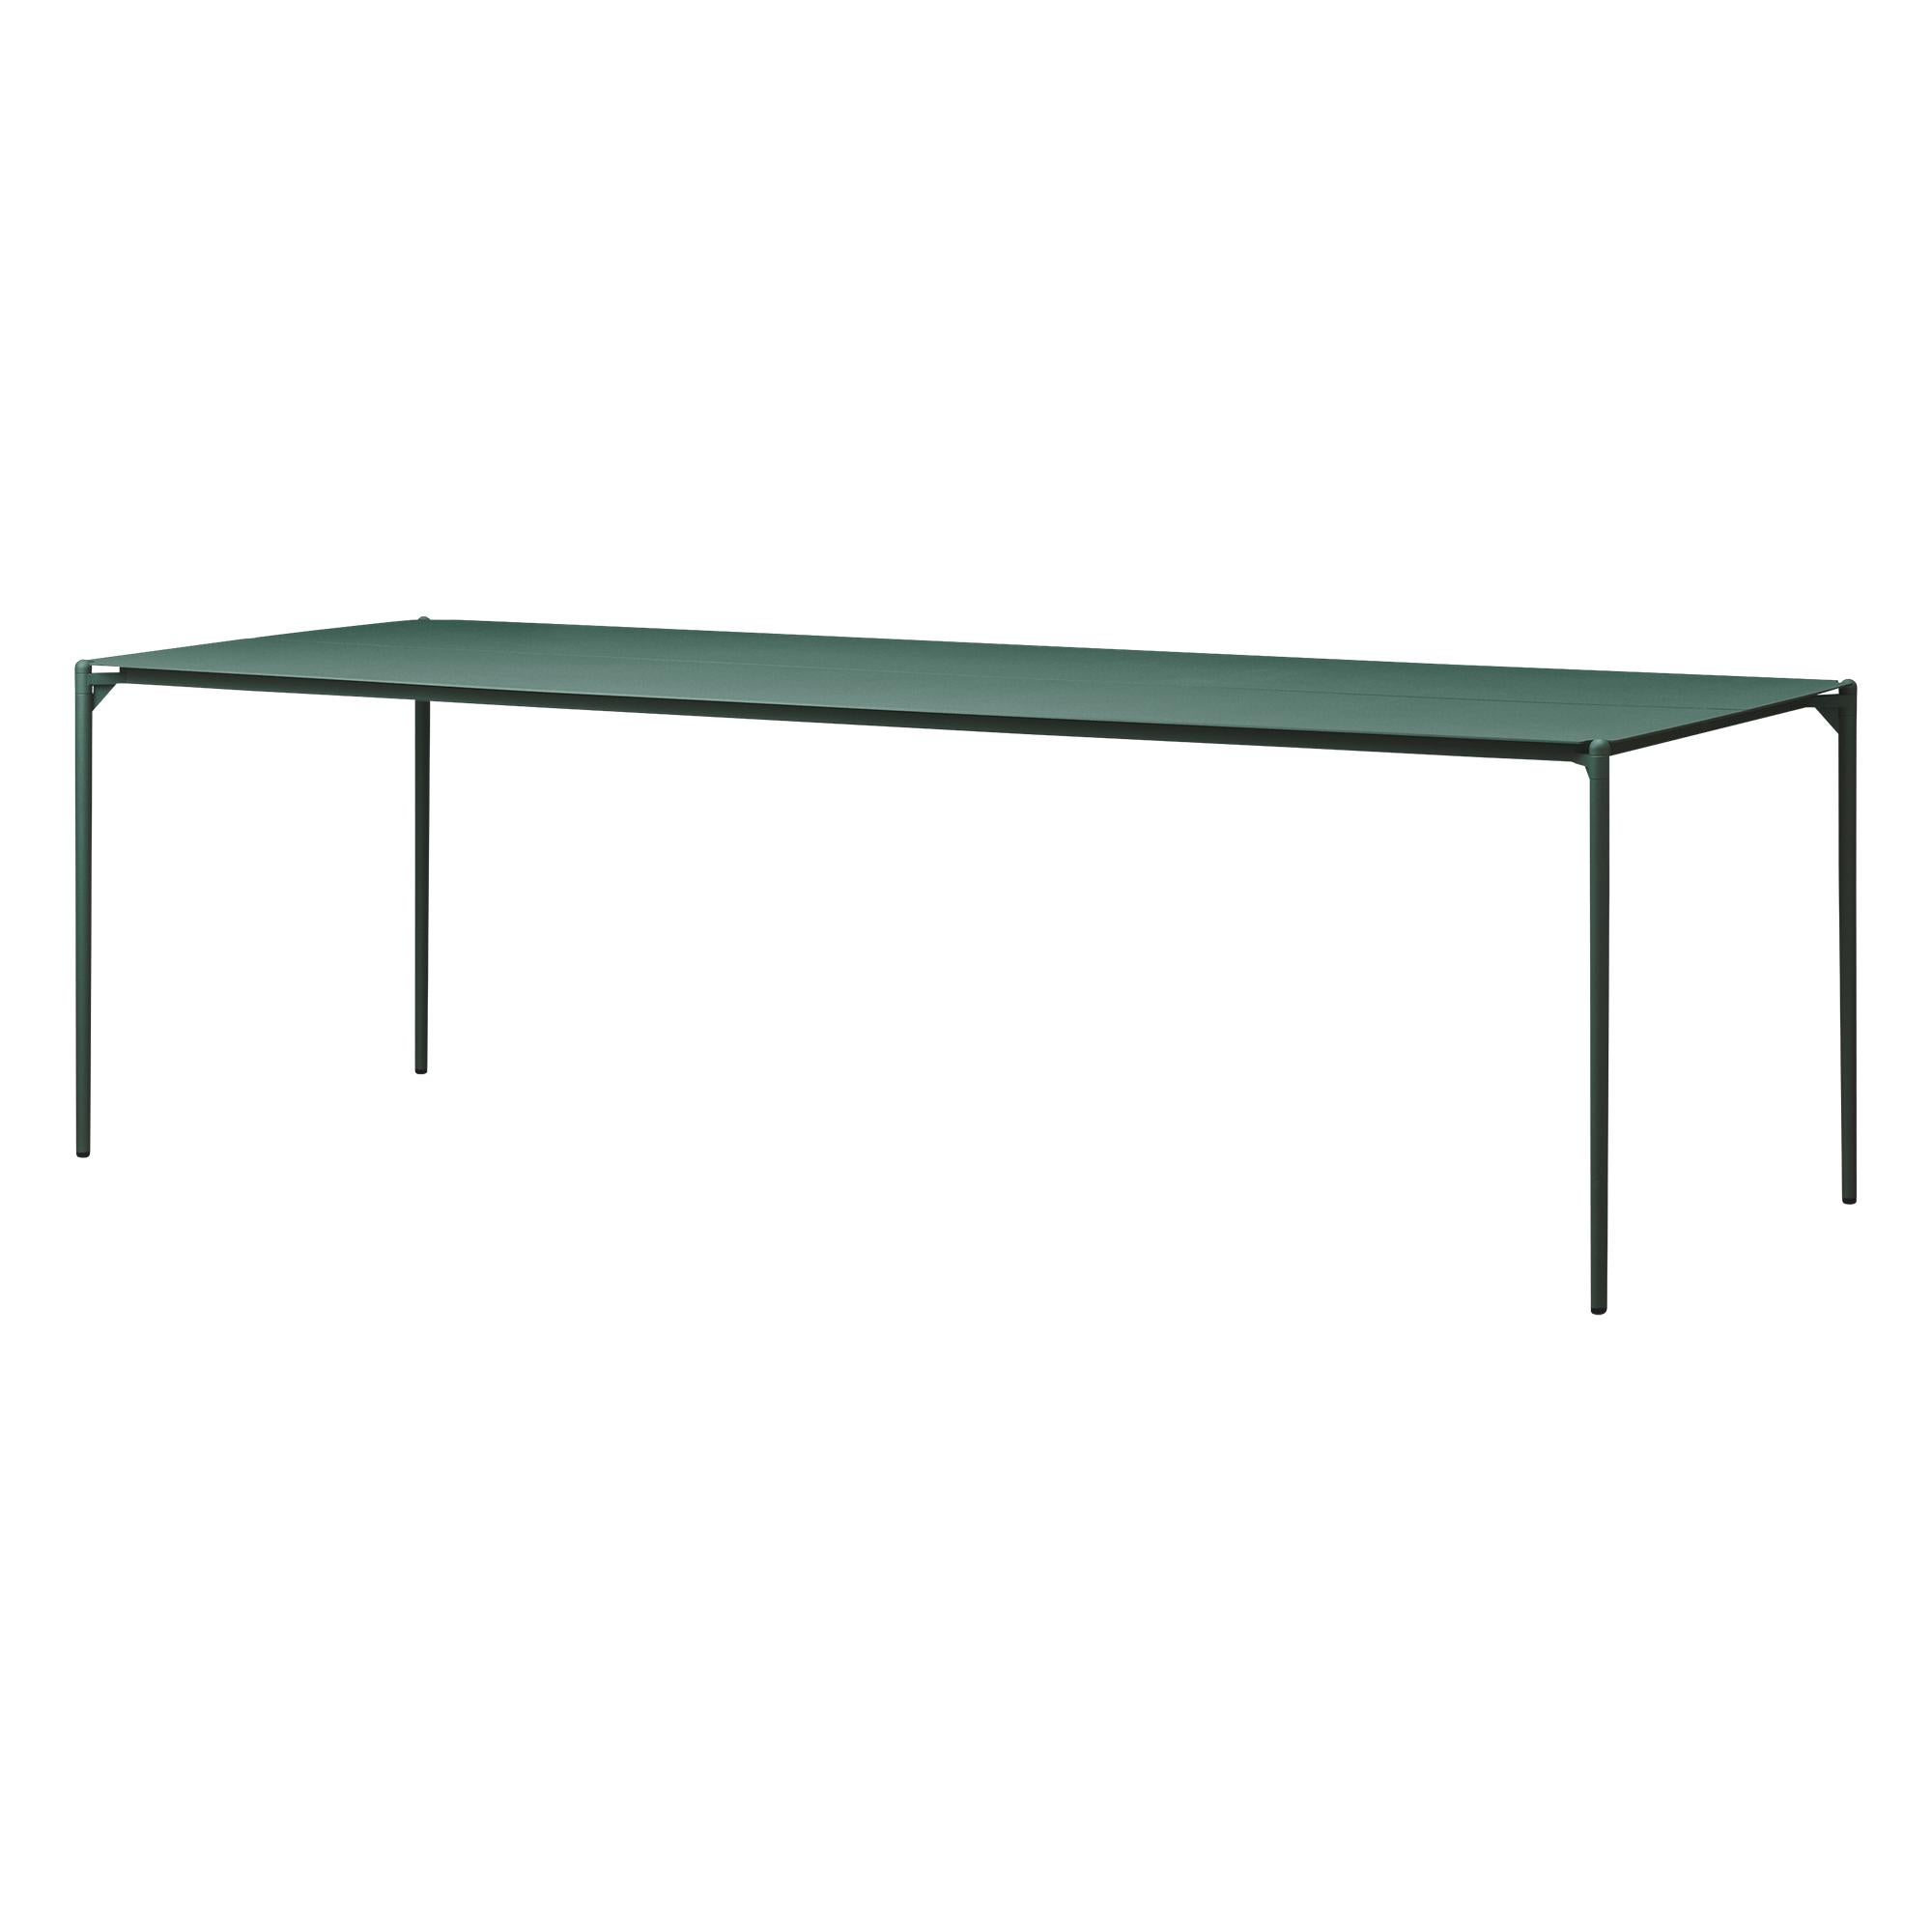 Large Forest Minimalist table
Dimensions: D 240 x W 90 x H 72 cm 
Materials: Steel w. Matte Powder Coating & Aluminum w. Matte Powder Coating.
Available in colors: Taupe, Bordeaux, Forest, Ginger Bread, Black and, Black and Gold.


Bring elegance